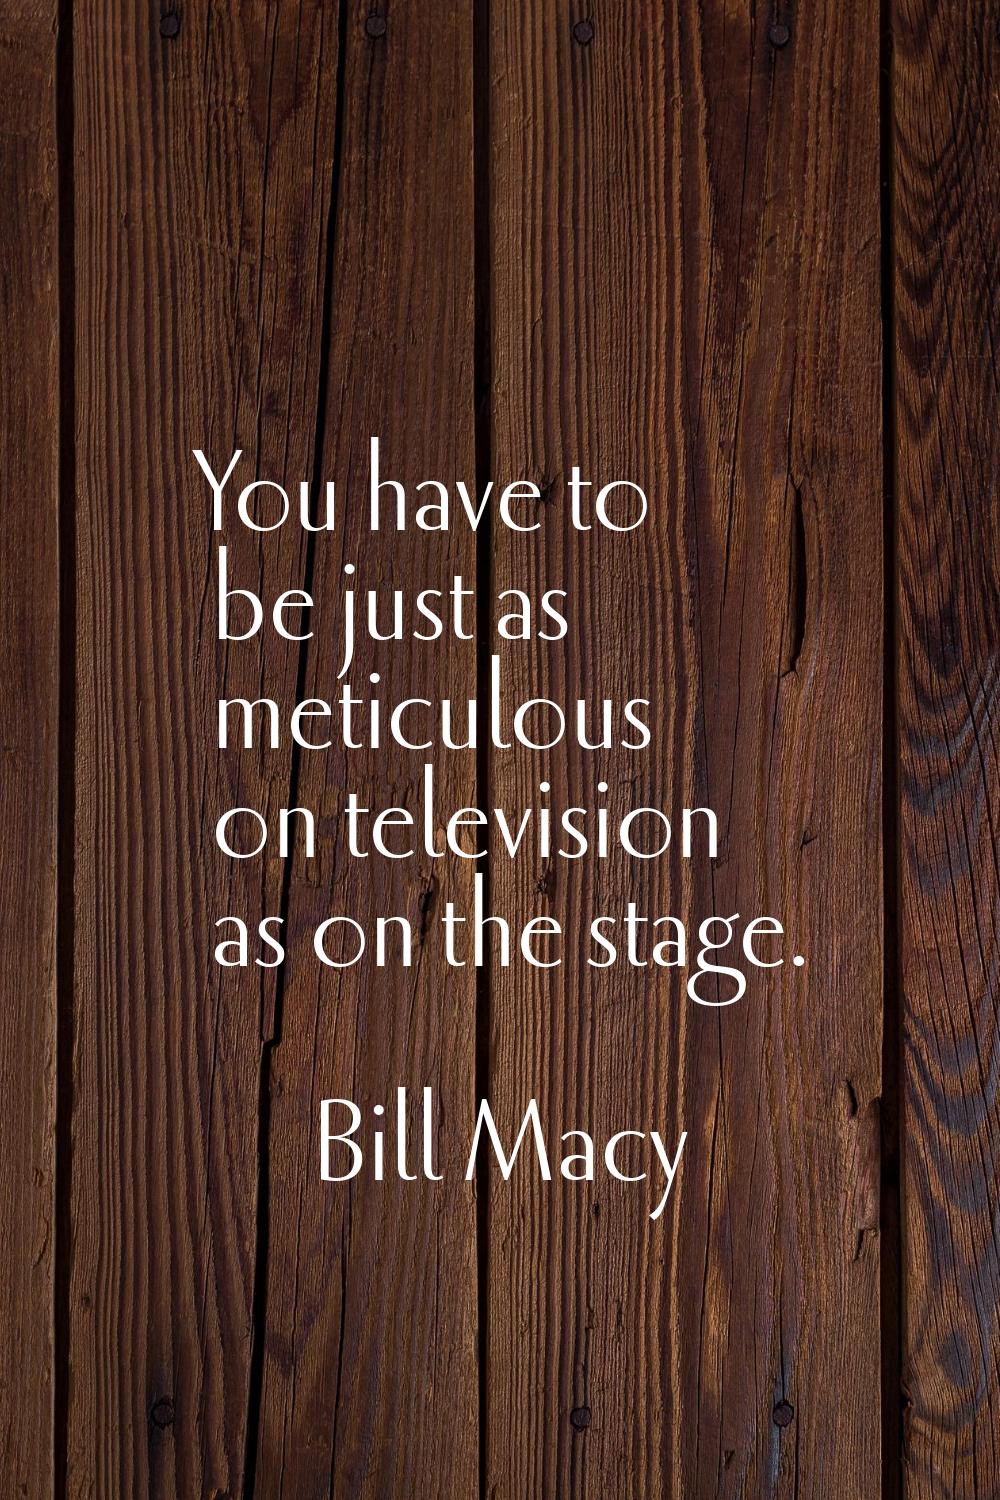 You have to be just as meticulous on television as on the stage.